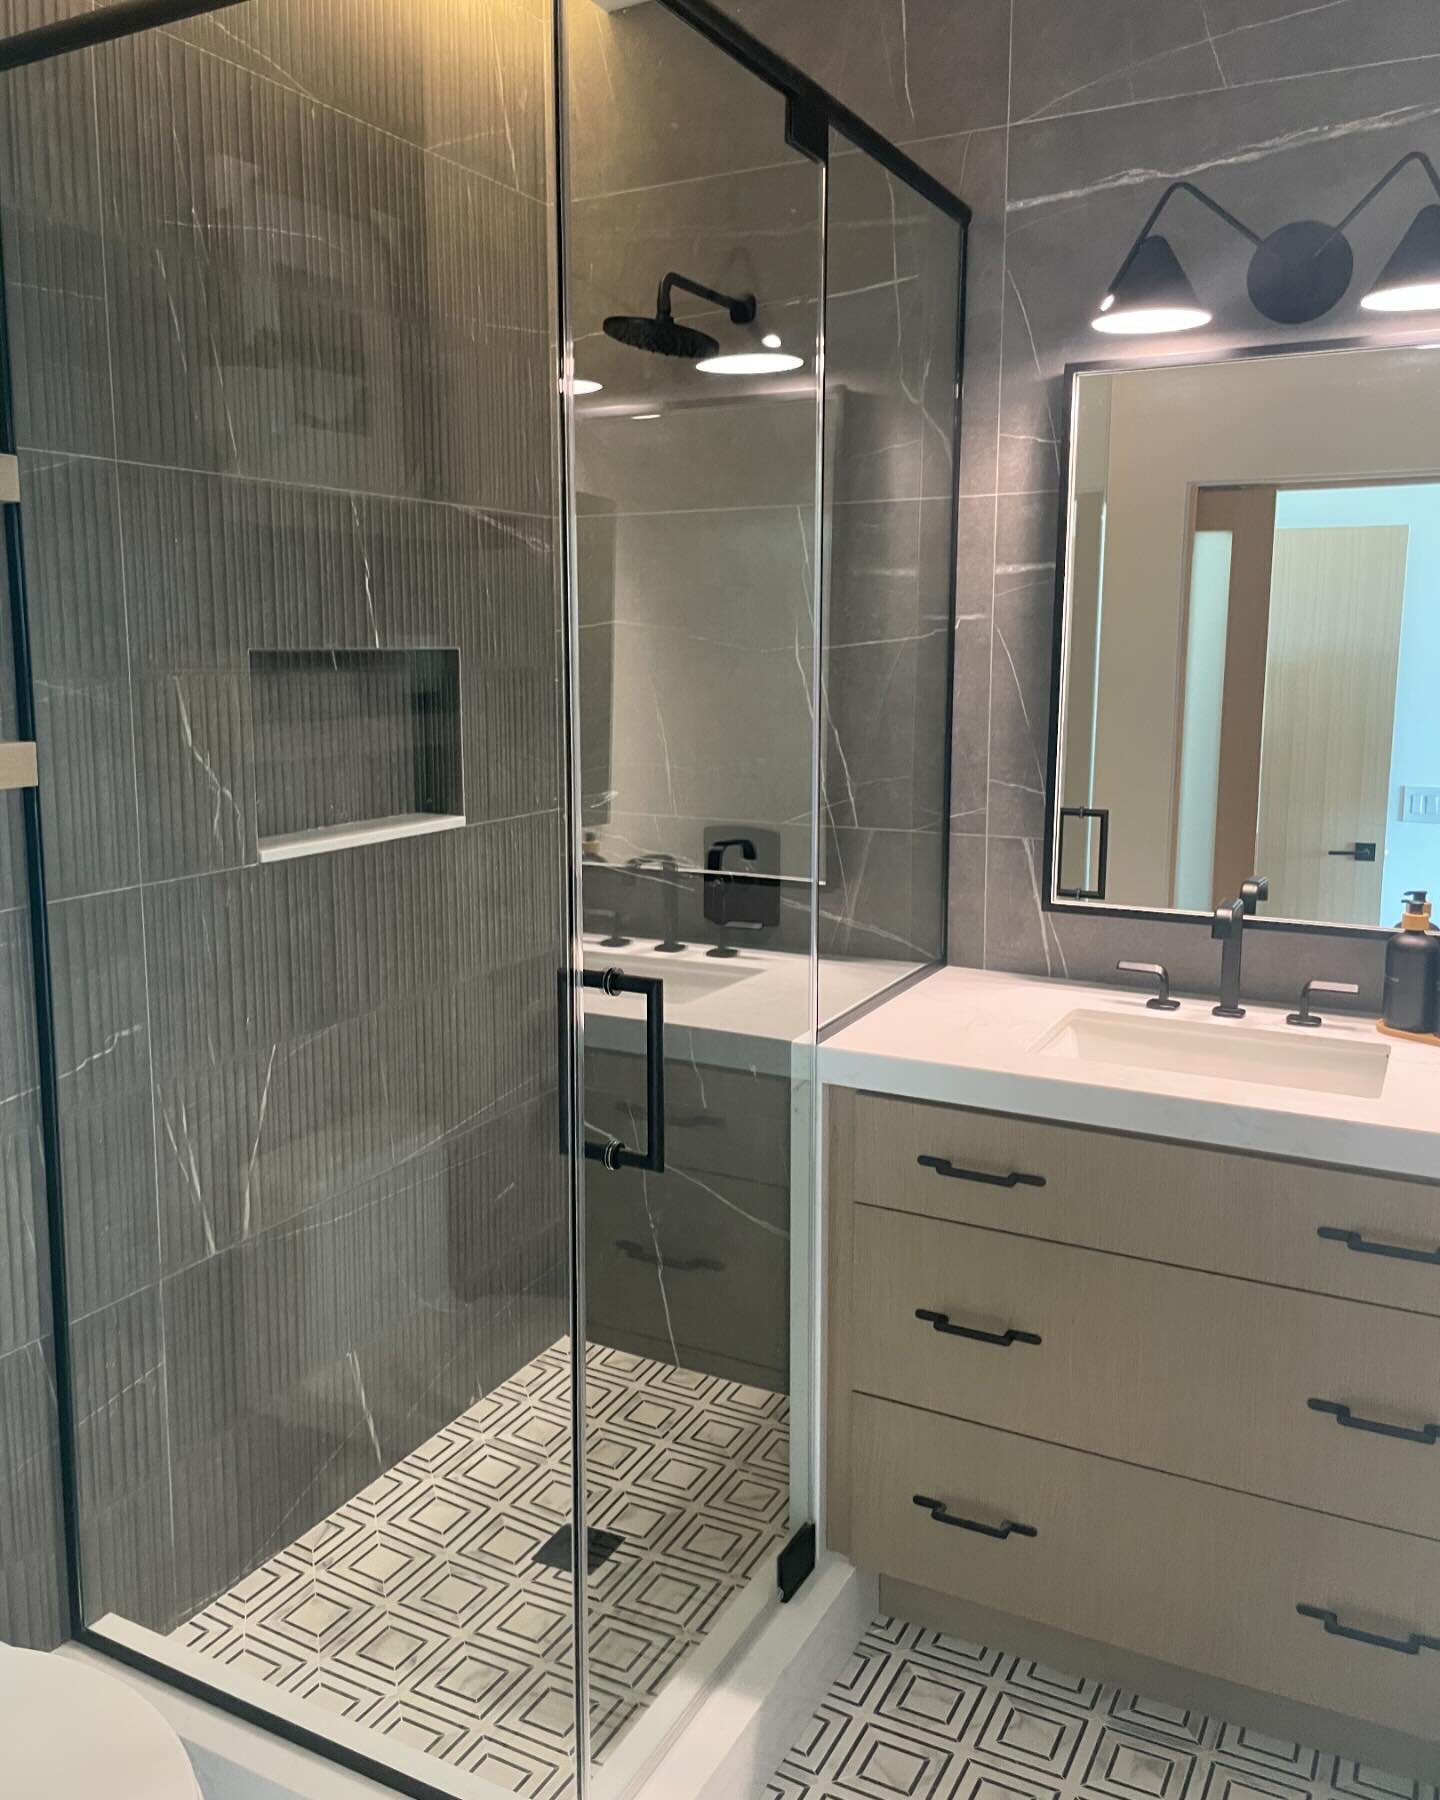 Exciting update! 🚿✨ The shower glass is finally installed, and it&rsquo;s all about those finishing touches now. In one bathroom, we opted for a sleek black c-channel on the edges, to add a subtle accent without overwhelming the space. Meanwhile, in